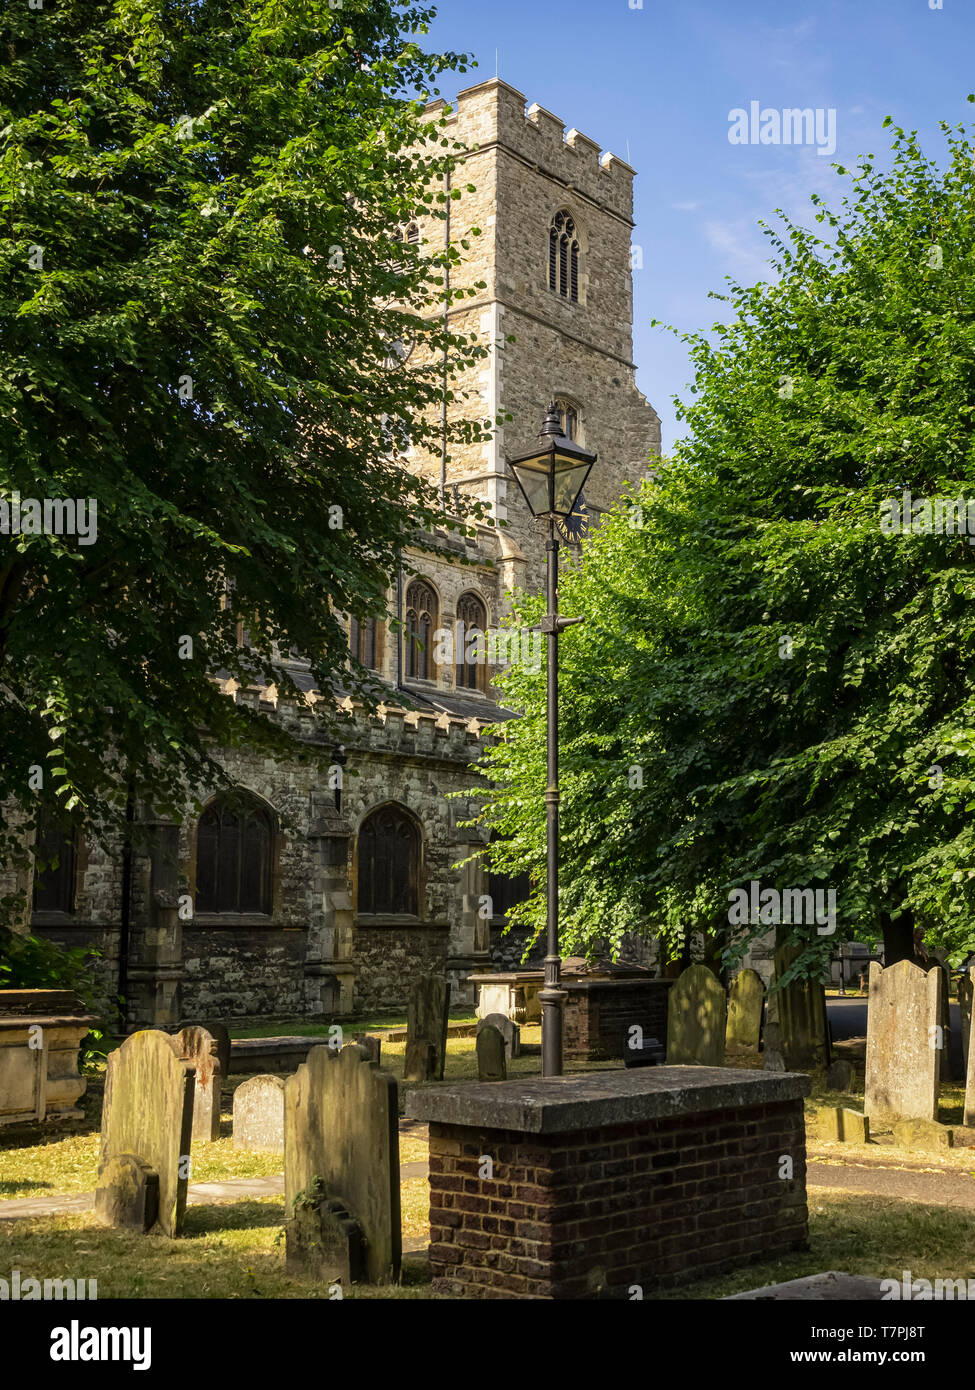 FULHAM, LONDON, UK - JULY 04, 2018:  Exterior view of All Saints Church Stock Photo